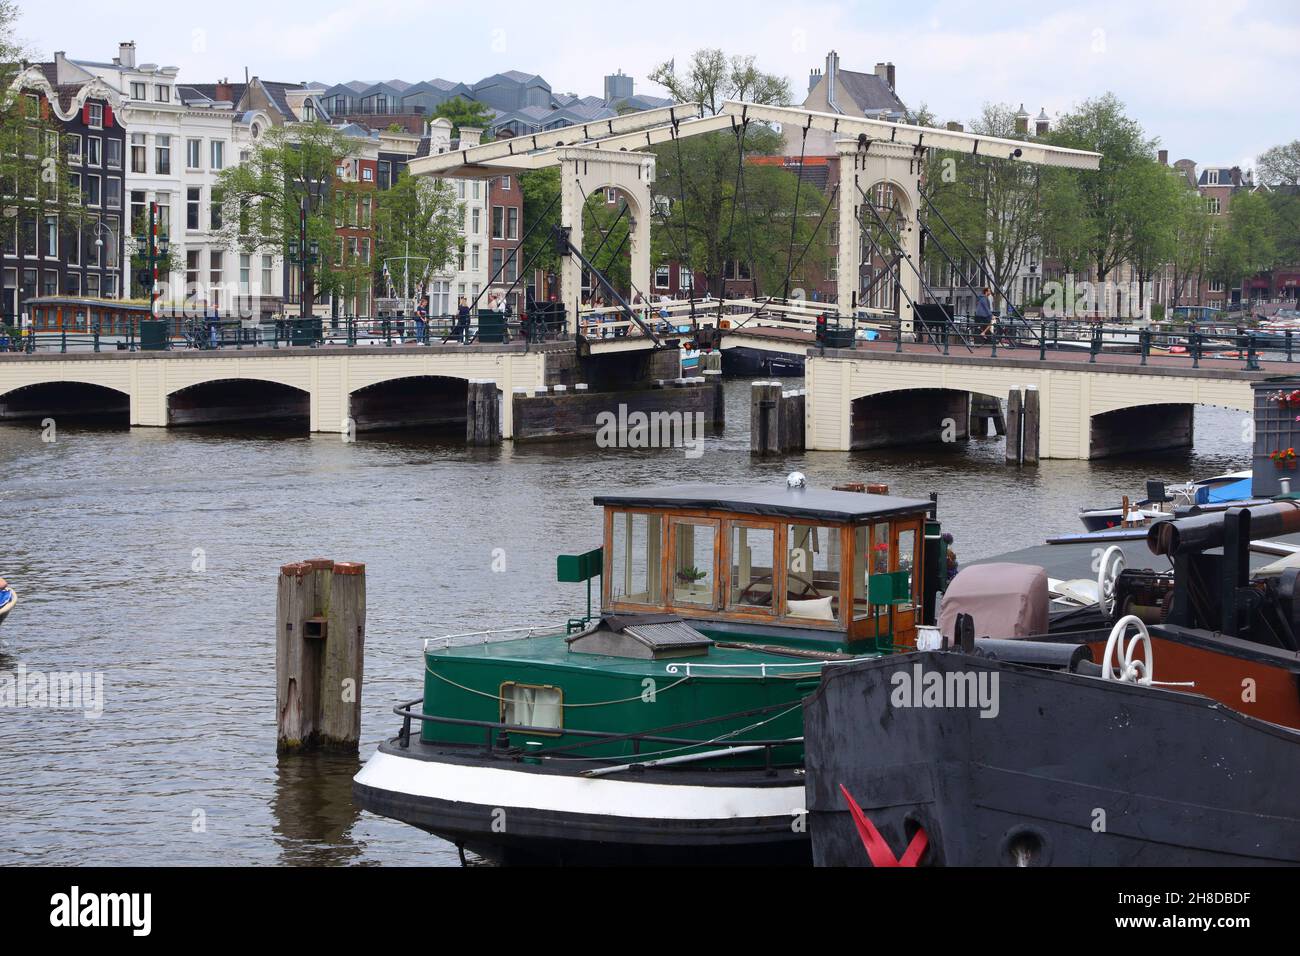 AMSTERDAM, NETHERLANDS - JULY 8, 2017: People visit Magere Brug (The Skinny Bridge) in Amsterdam, Netherlands. Amsterdam is the capital city of The Ne Stock Photo